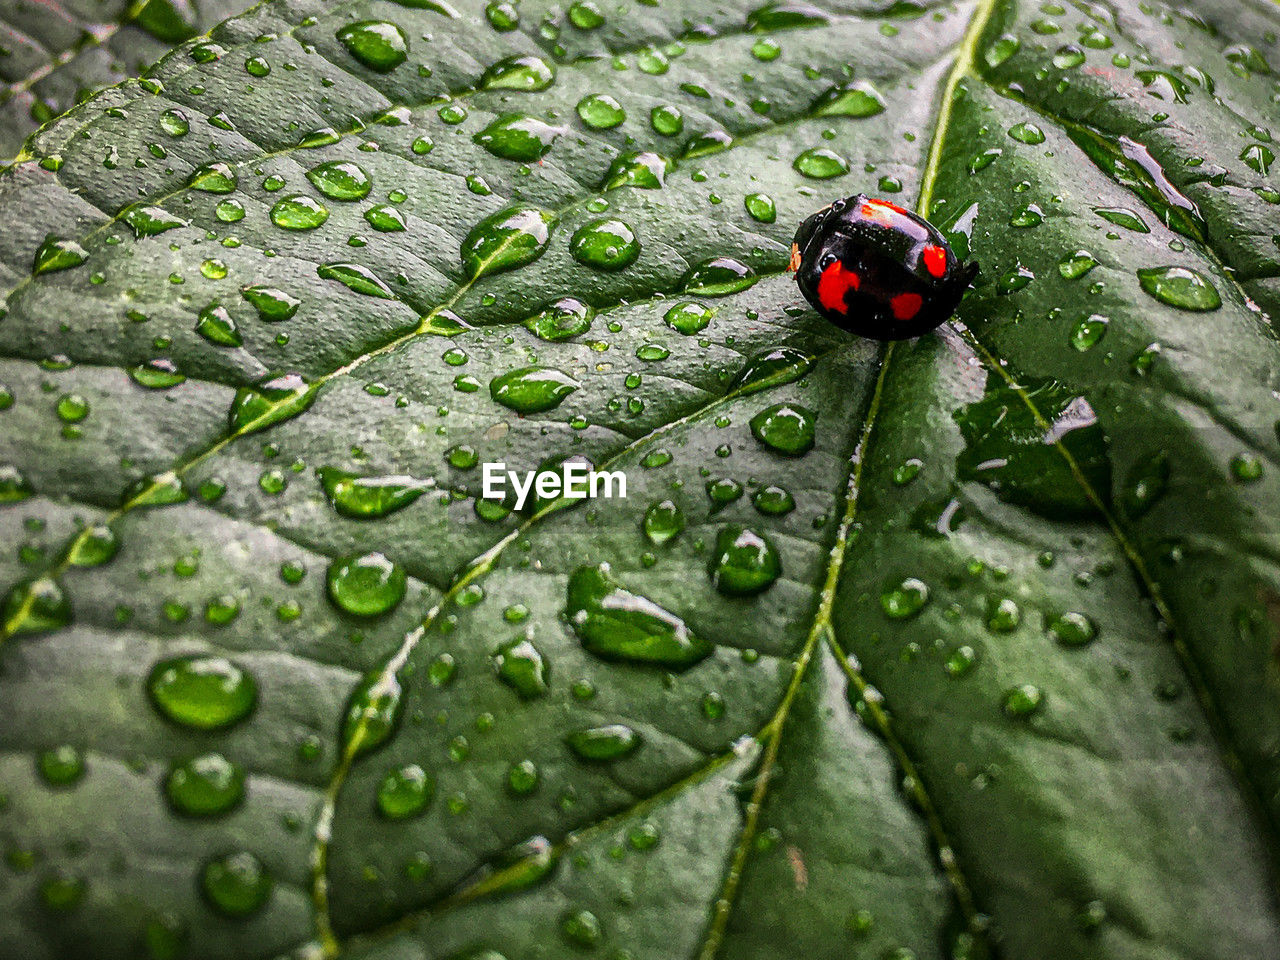 green, nature, close-up, leaf, macro photography, plant part, wet, drop, animal themes, animal, insect, animal wildlife, plant, water, beetle, ladybug, flower, one animal, no people, wildlife, day, beauty in nature, outdoors, red, rain, selective focus, leaf vein